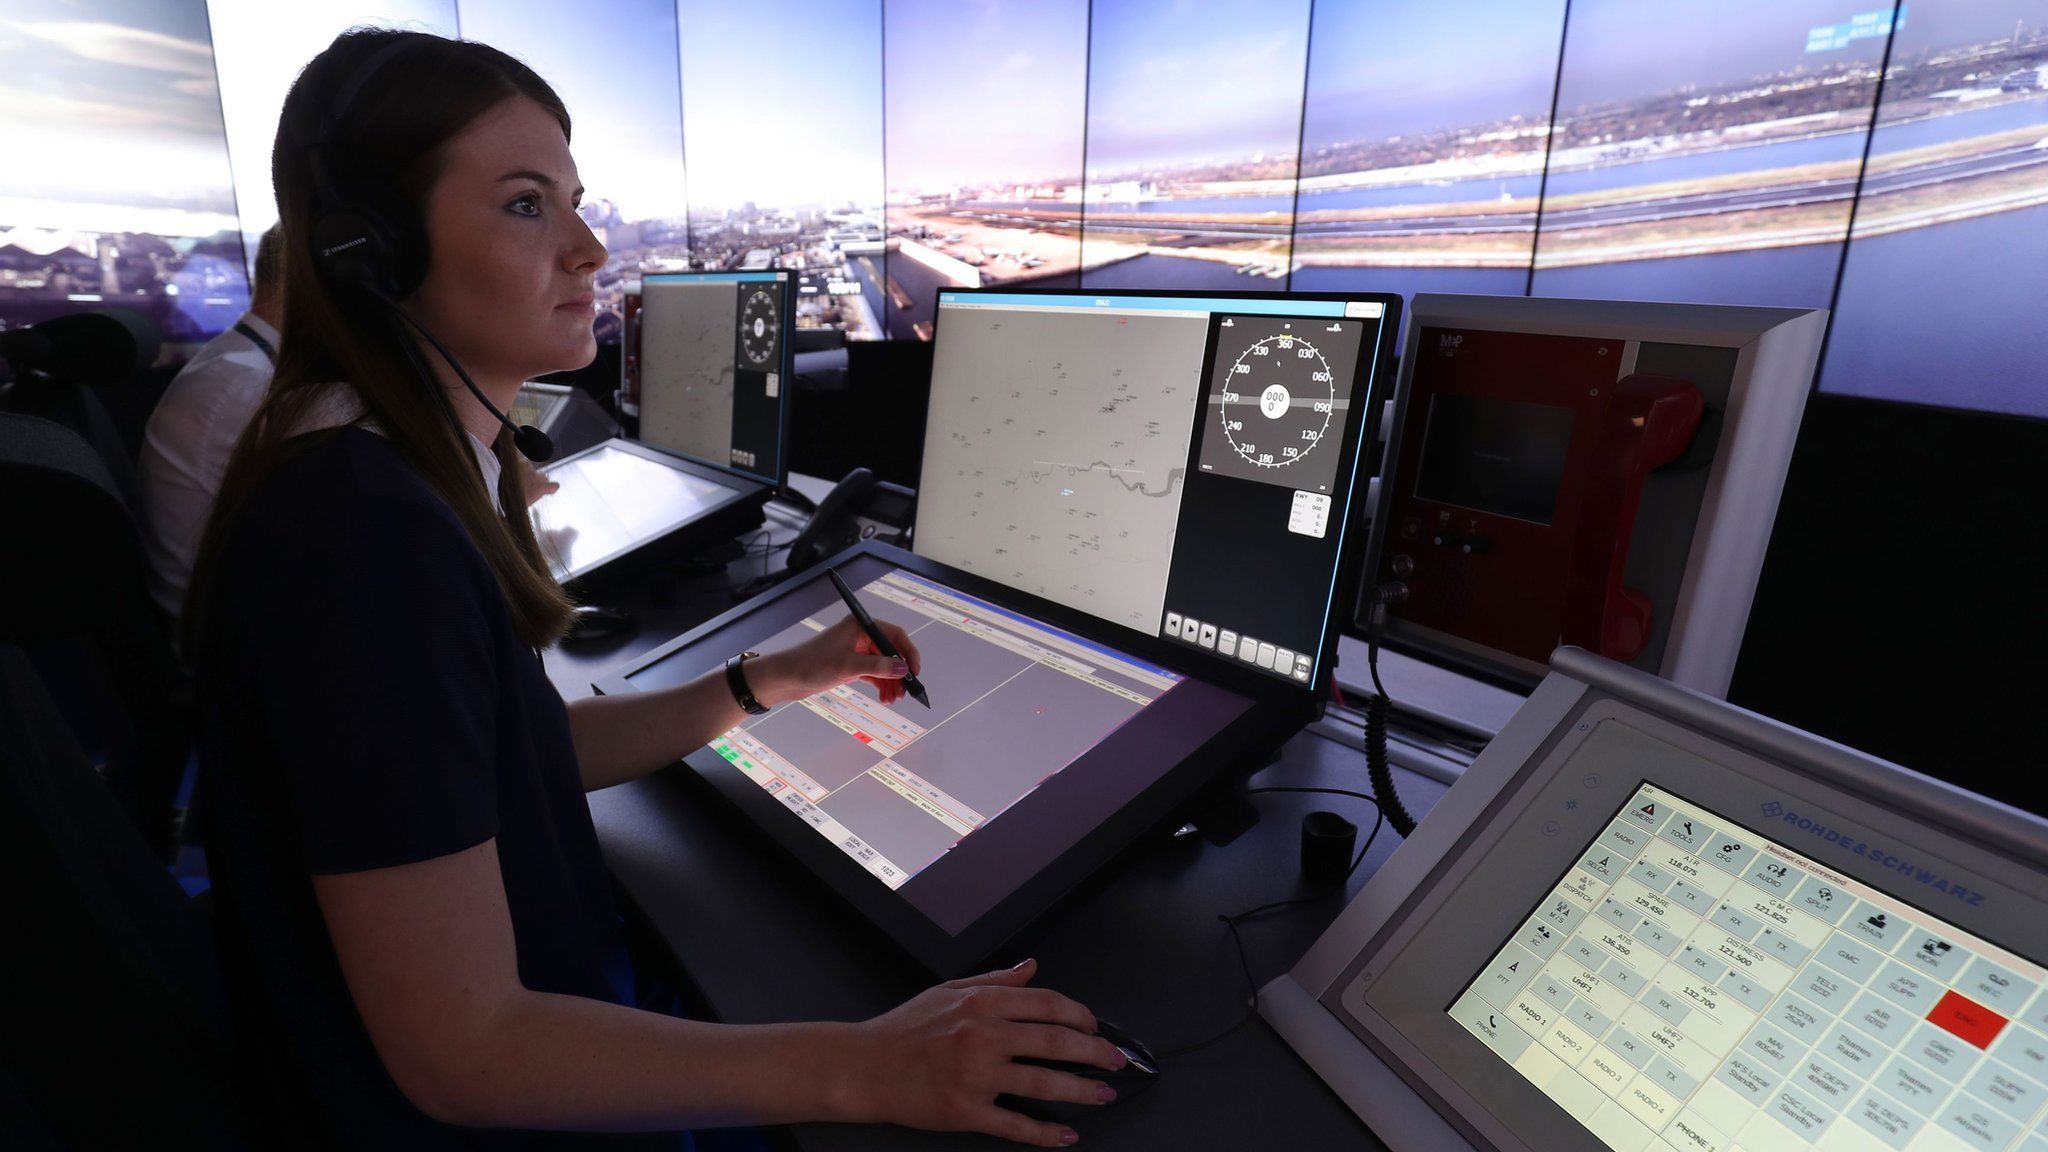 Nats personnel give a demonstration in the operations room, which will direct aircraft at London City Airport